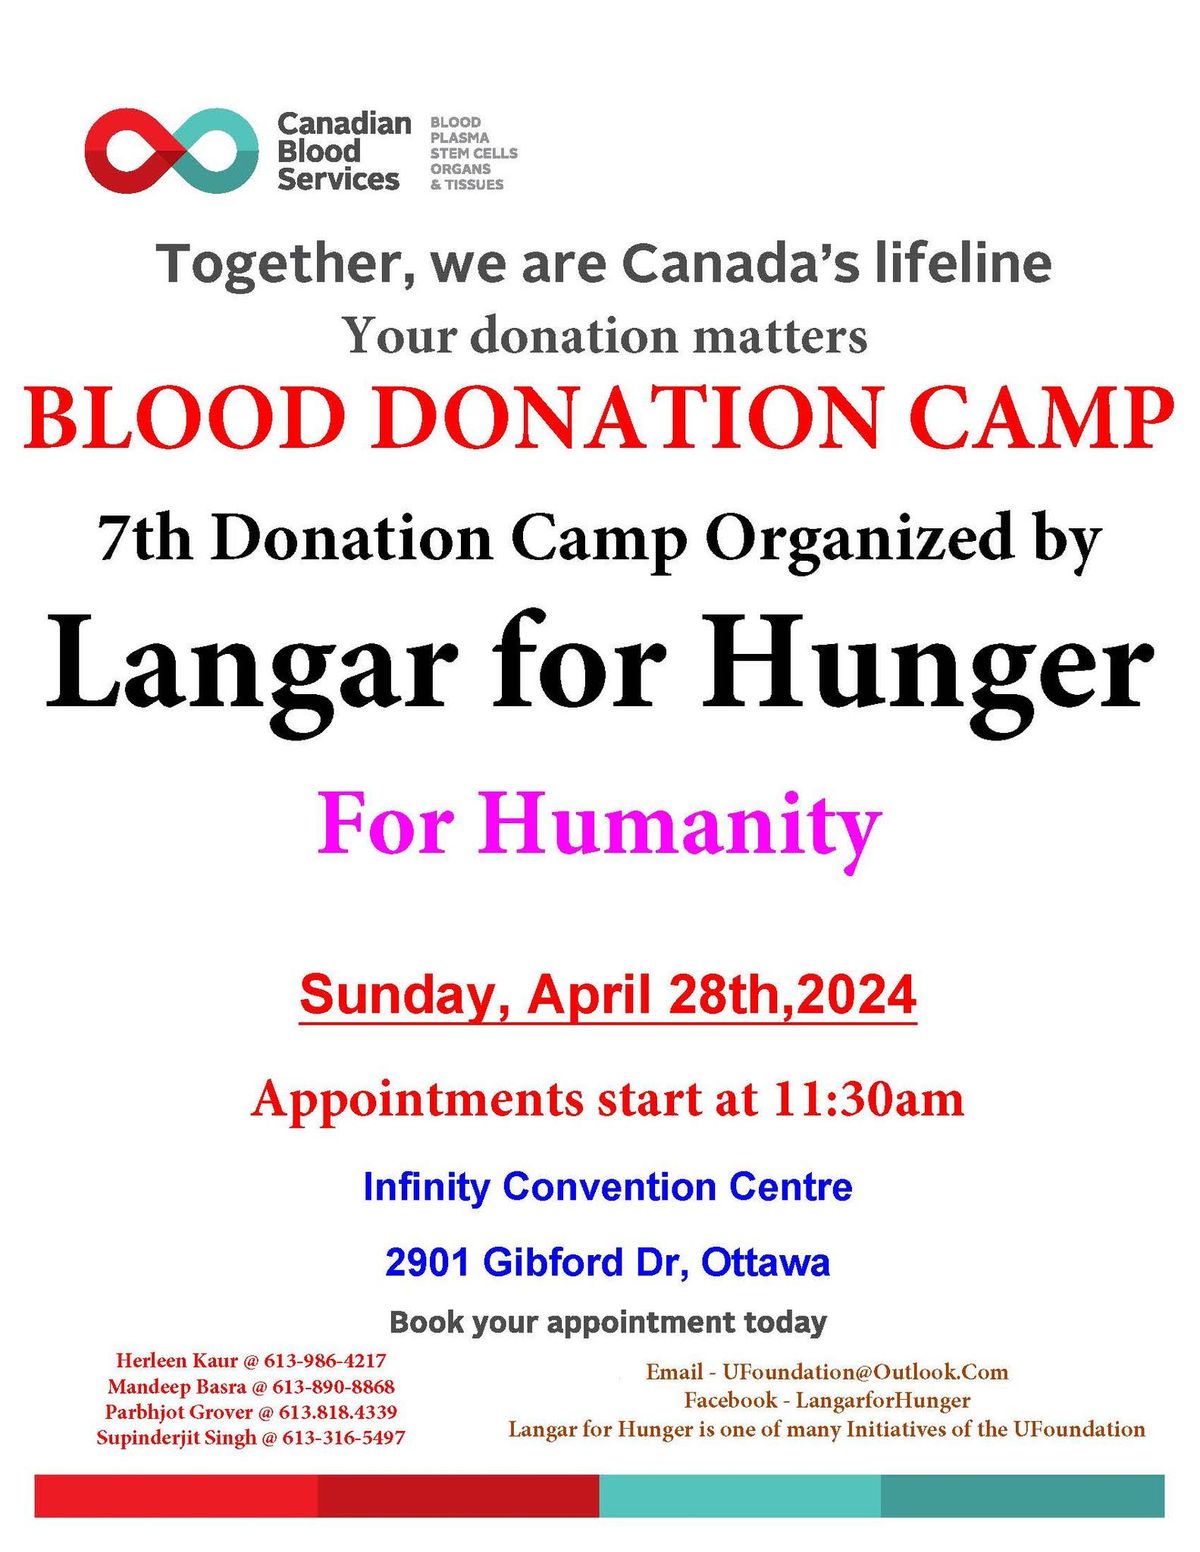 Blood Donation Camp for Humanity by Langar for Hunger